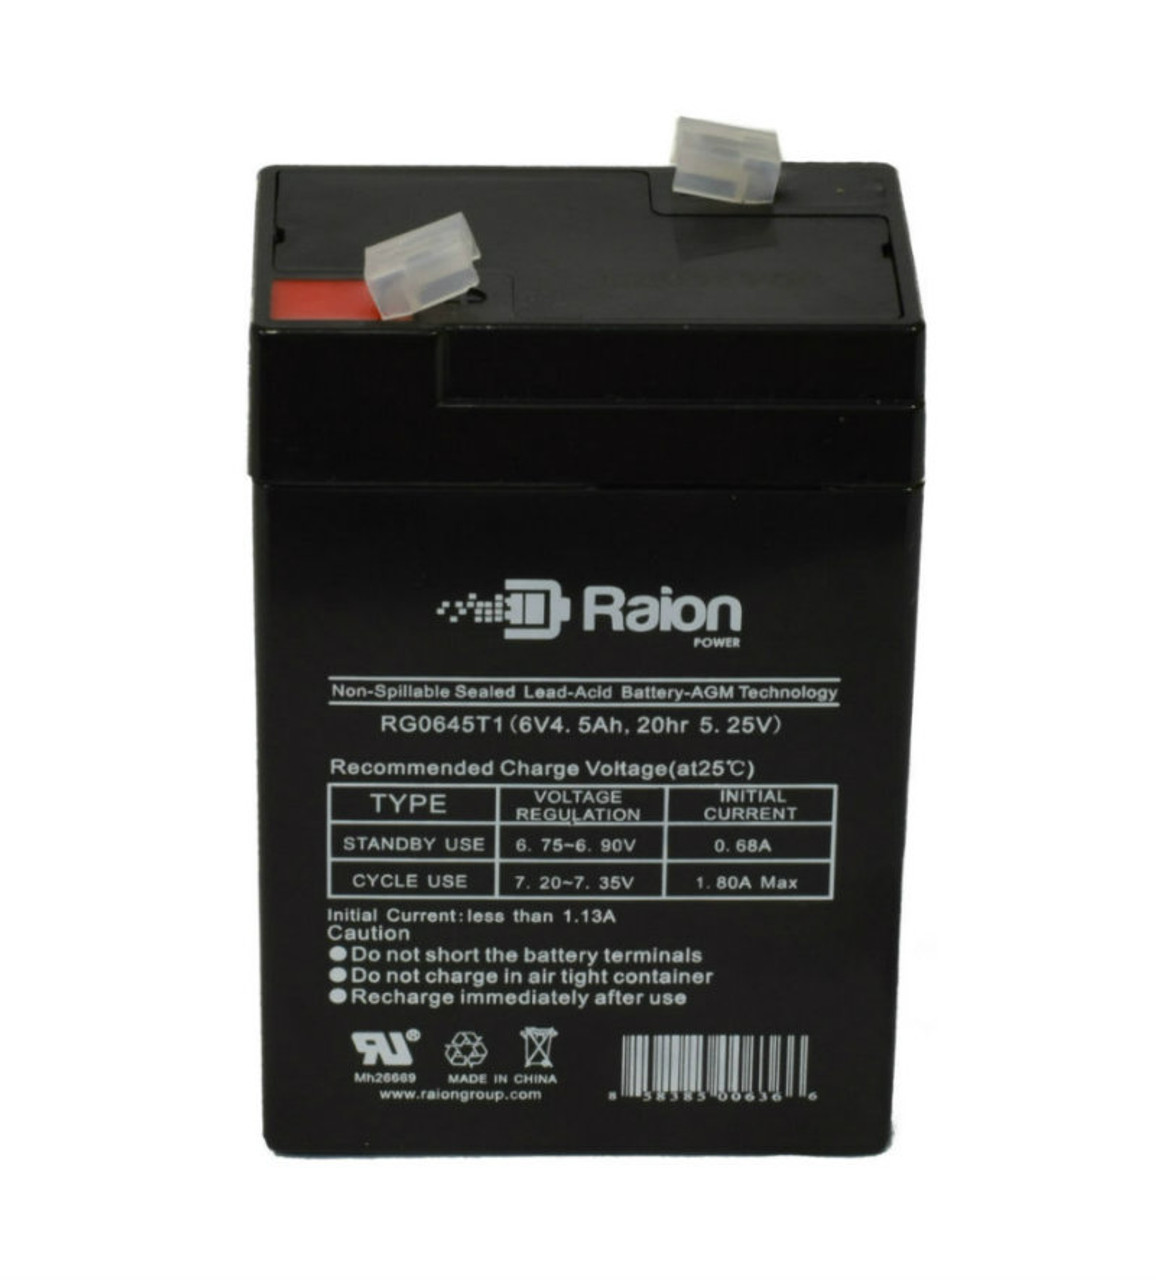 Raion Power RG0645T1 Replacement Battery Cartridge for Bird Products Corp Avain Portable Ventilator